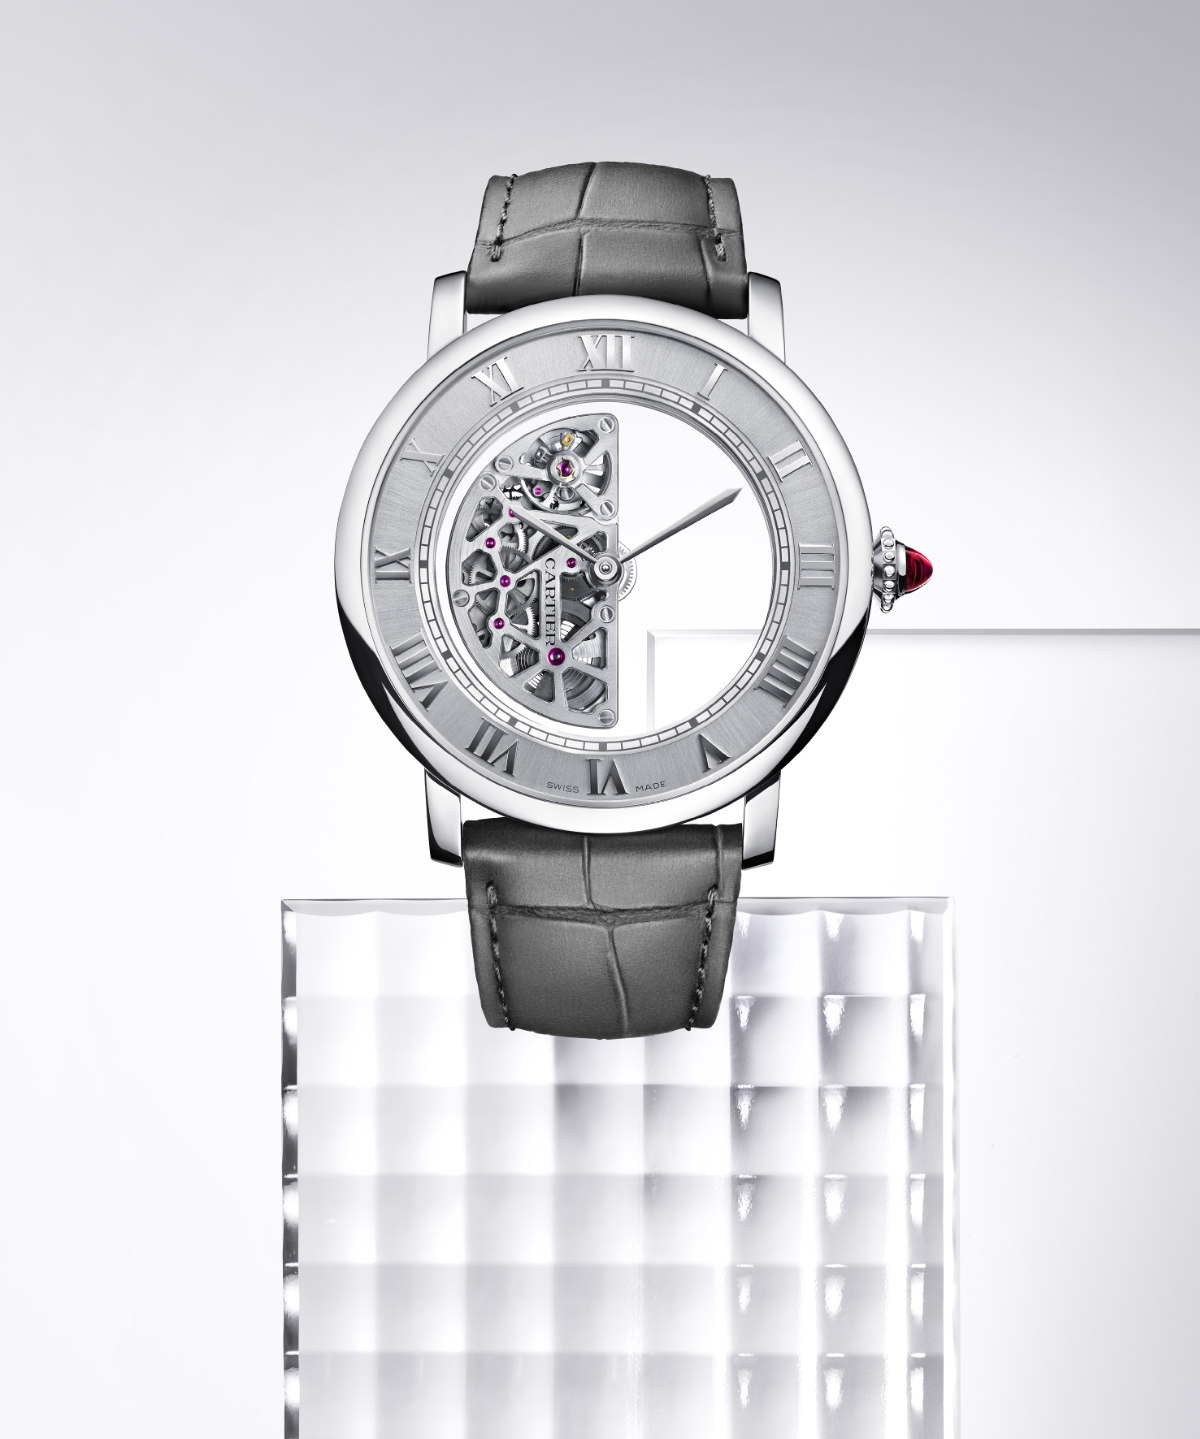 New Fine Watchmaking Enigma At Cartier: The Masse Mystérieuse